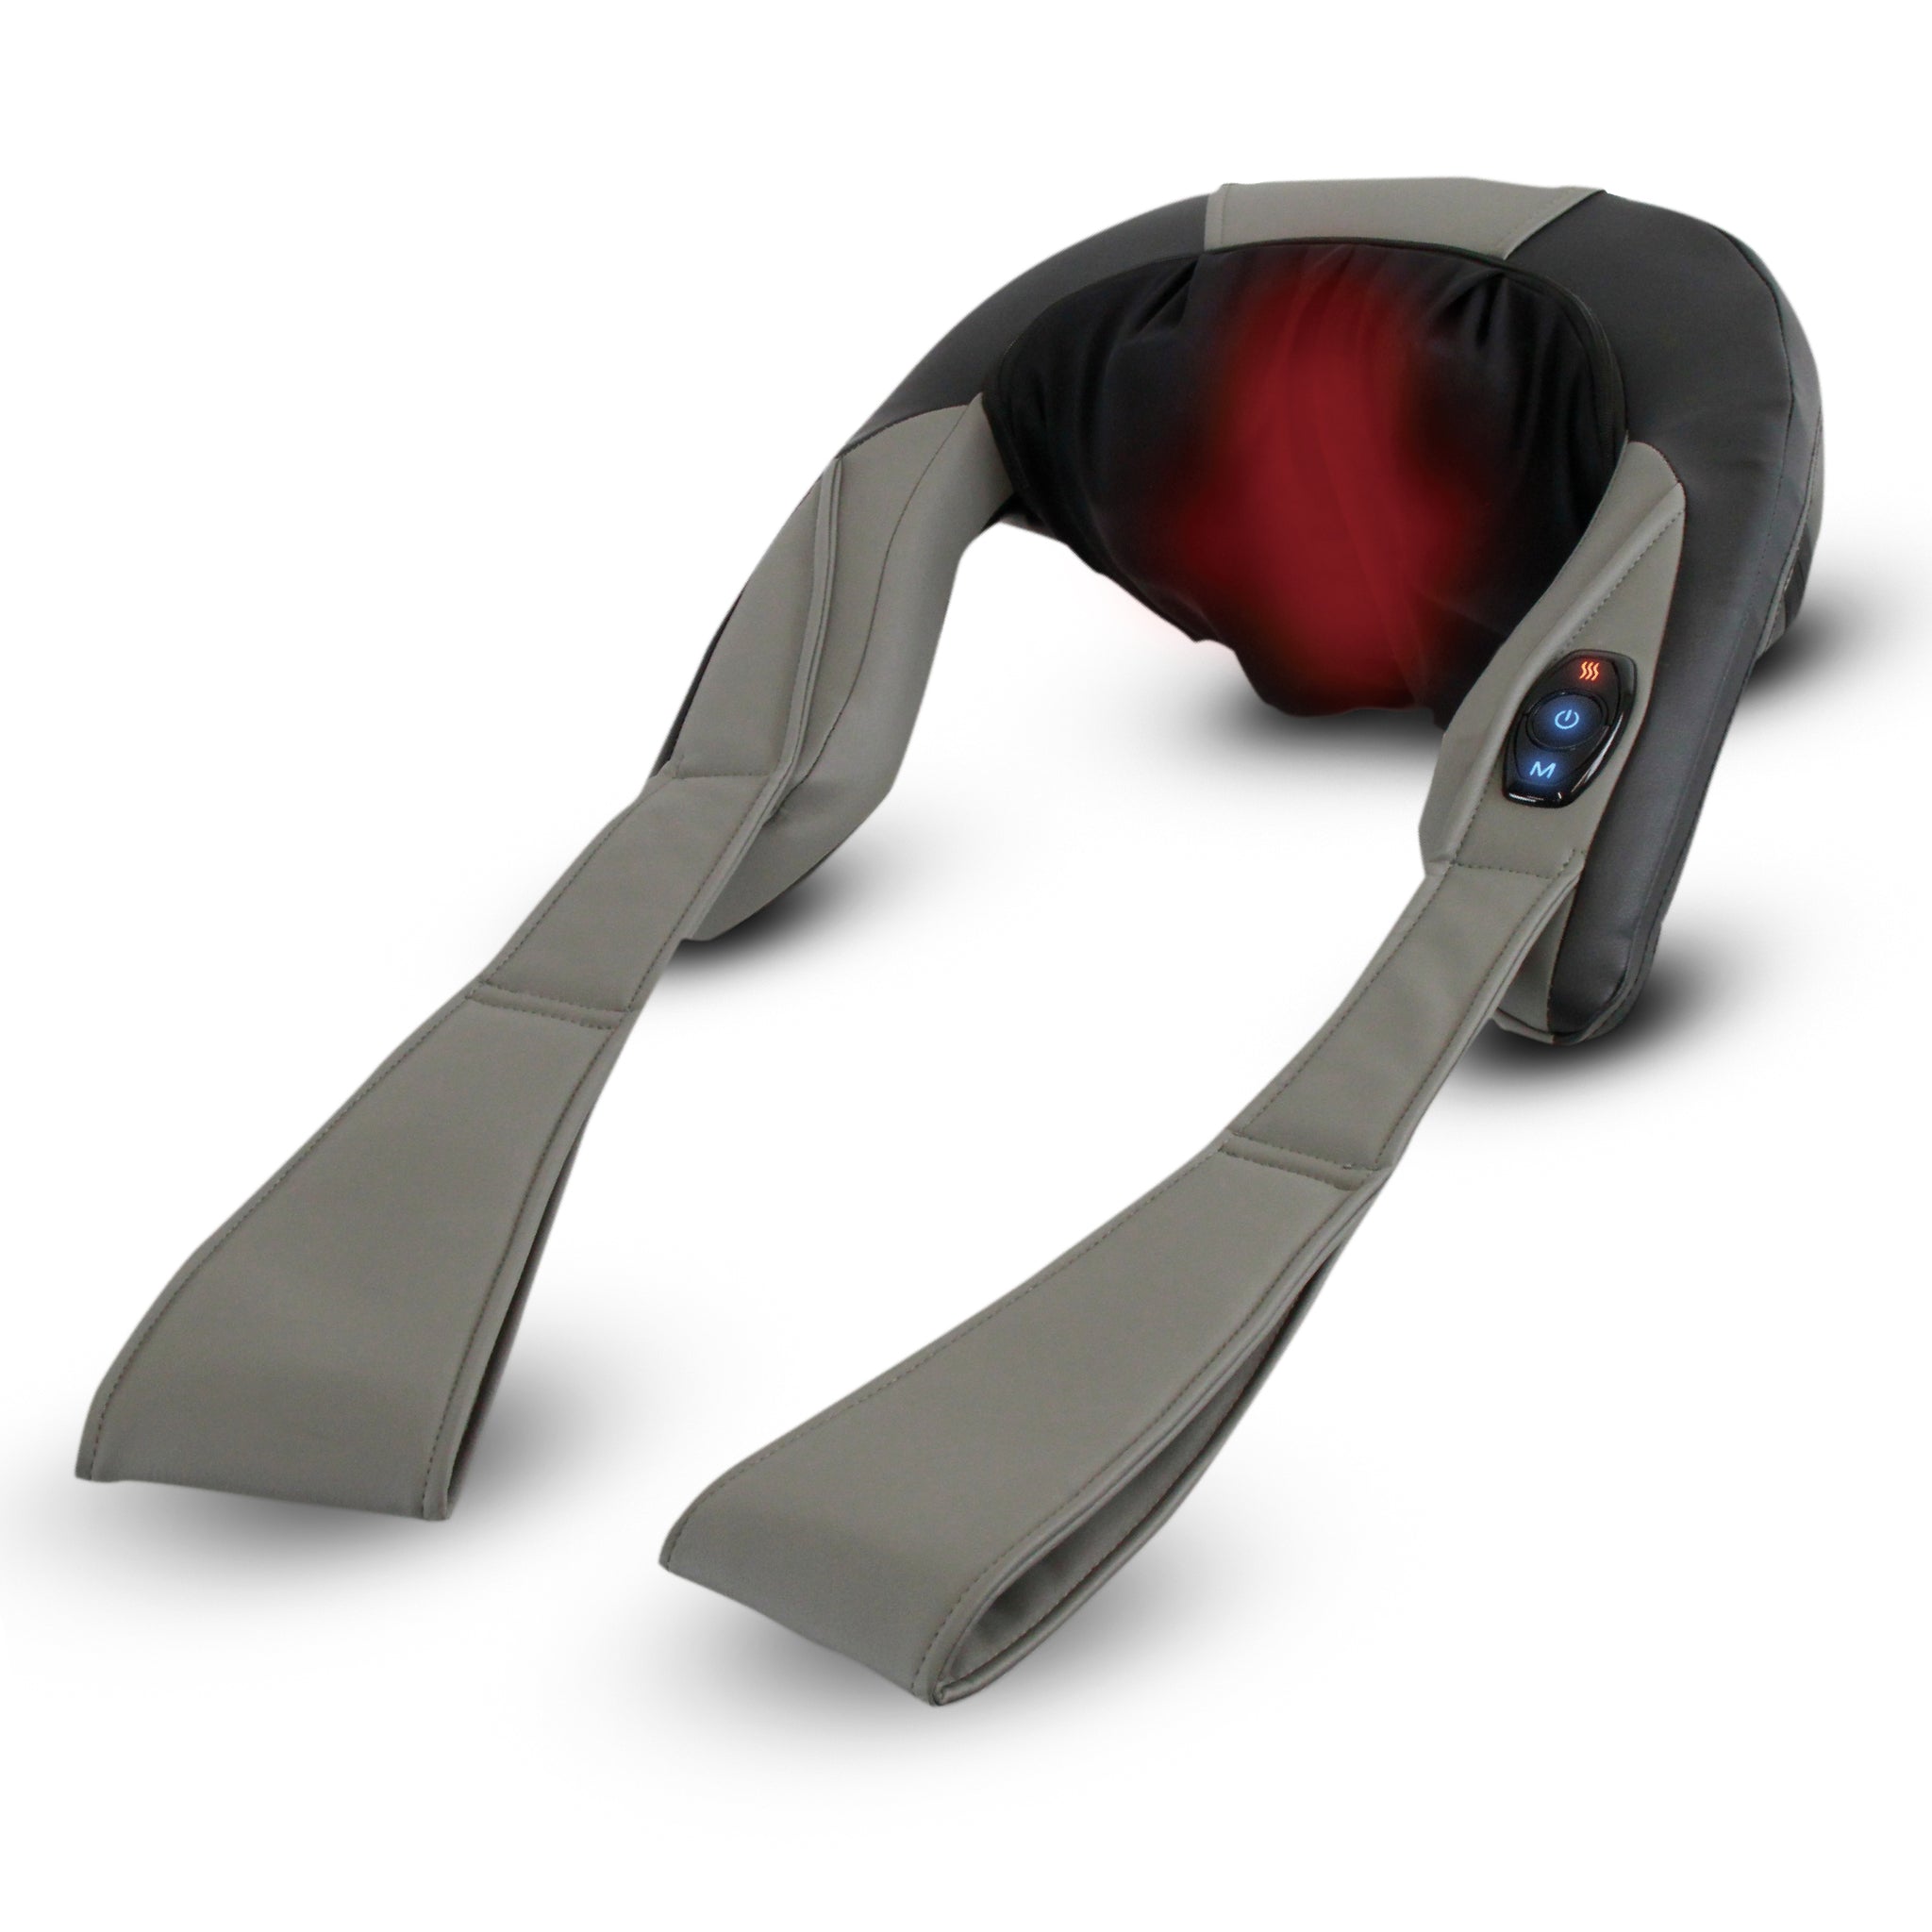 Grip and Grab Neck Rub Massager